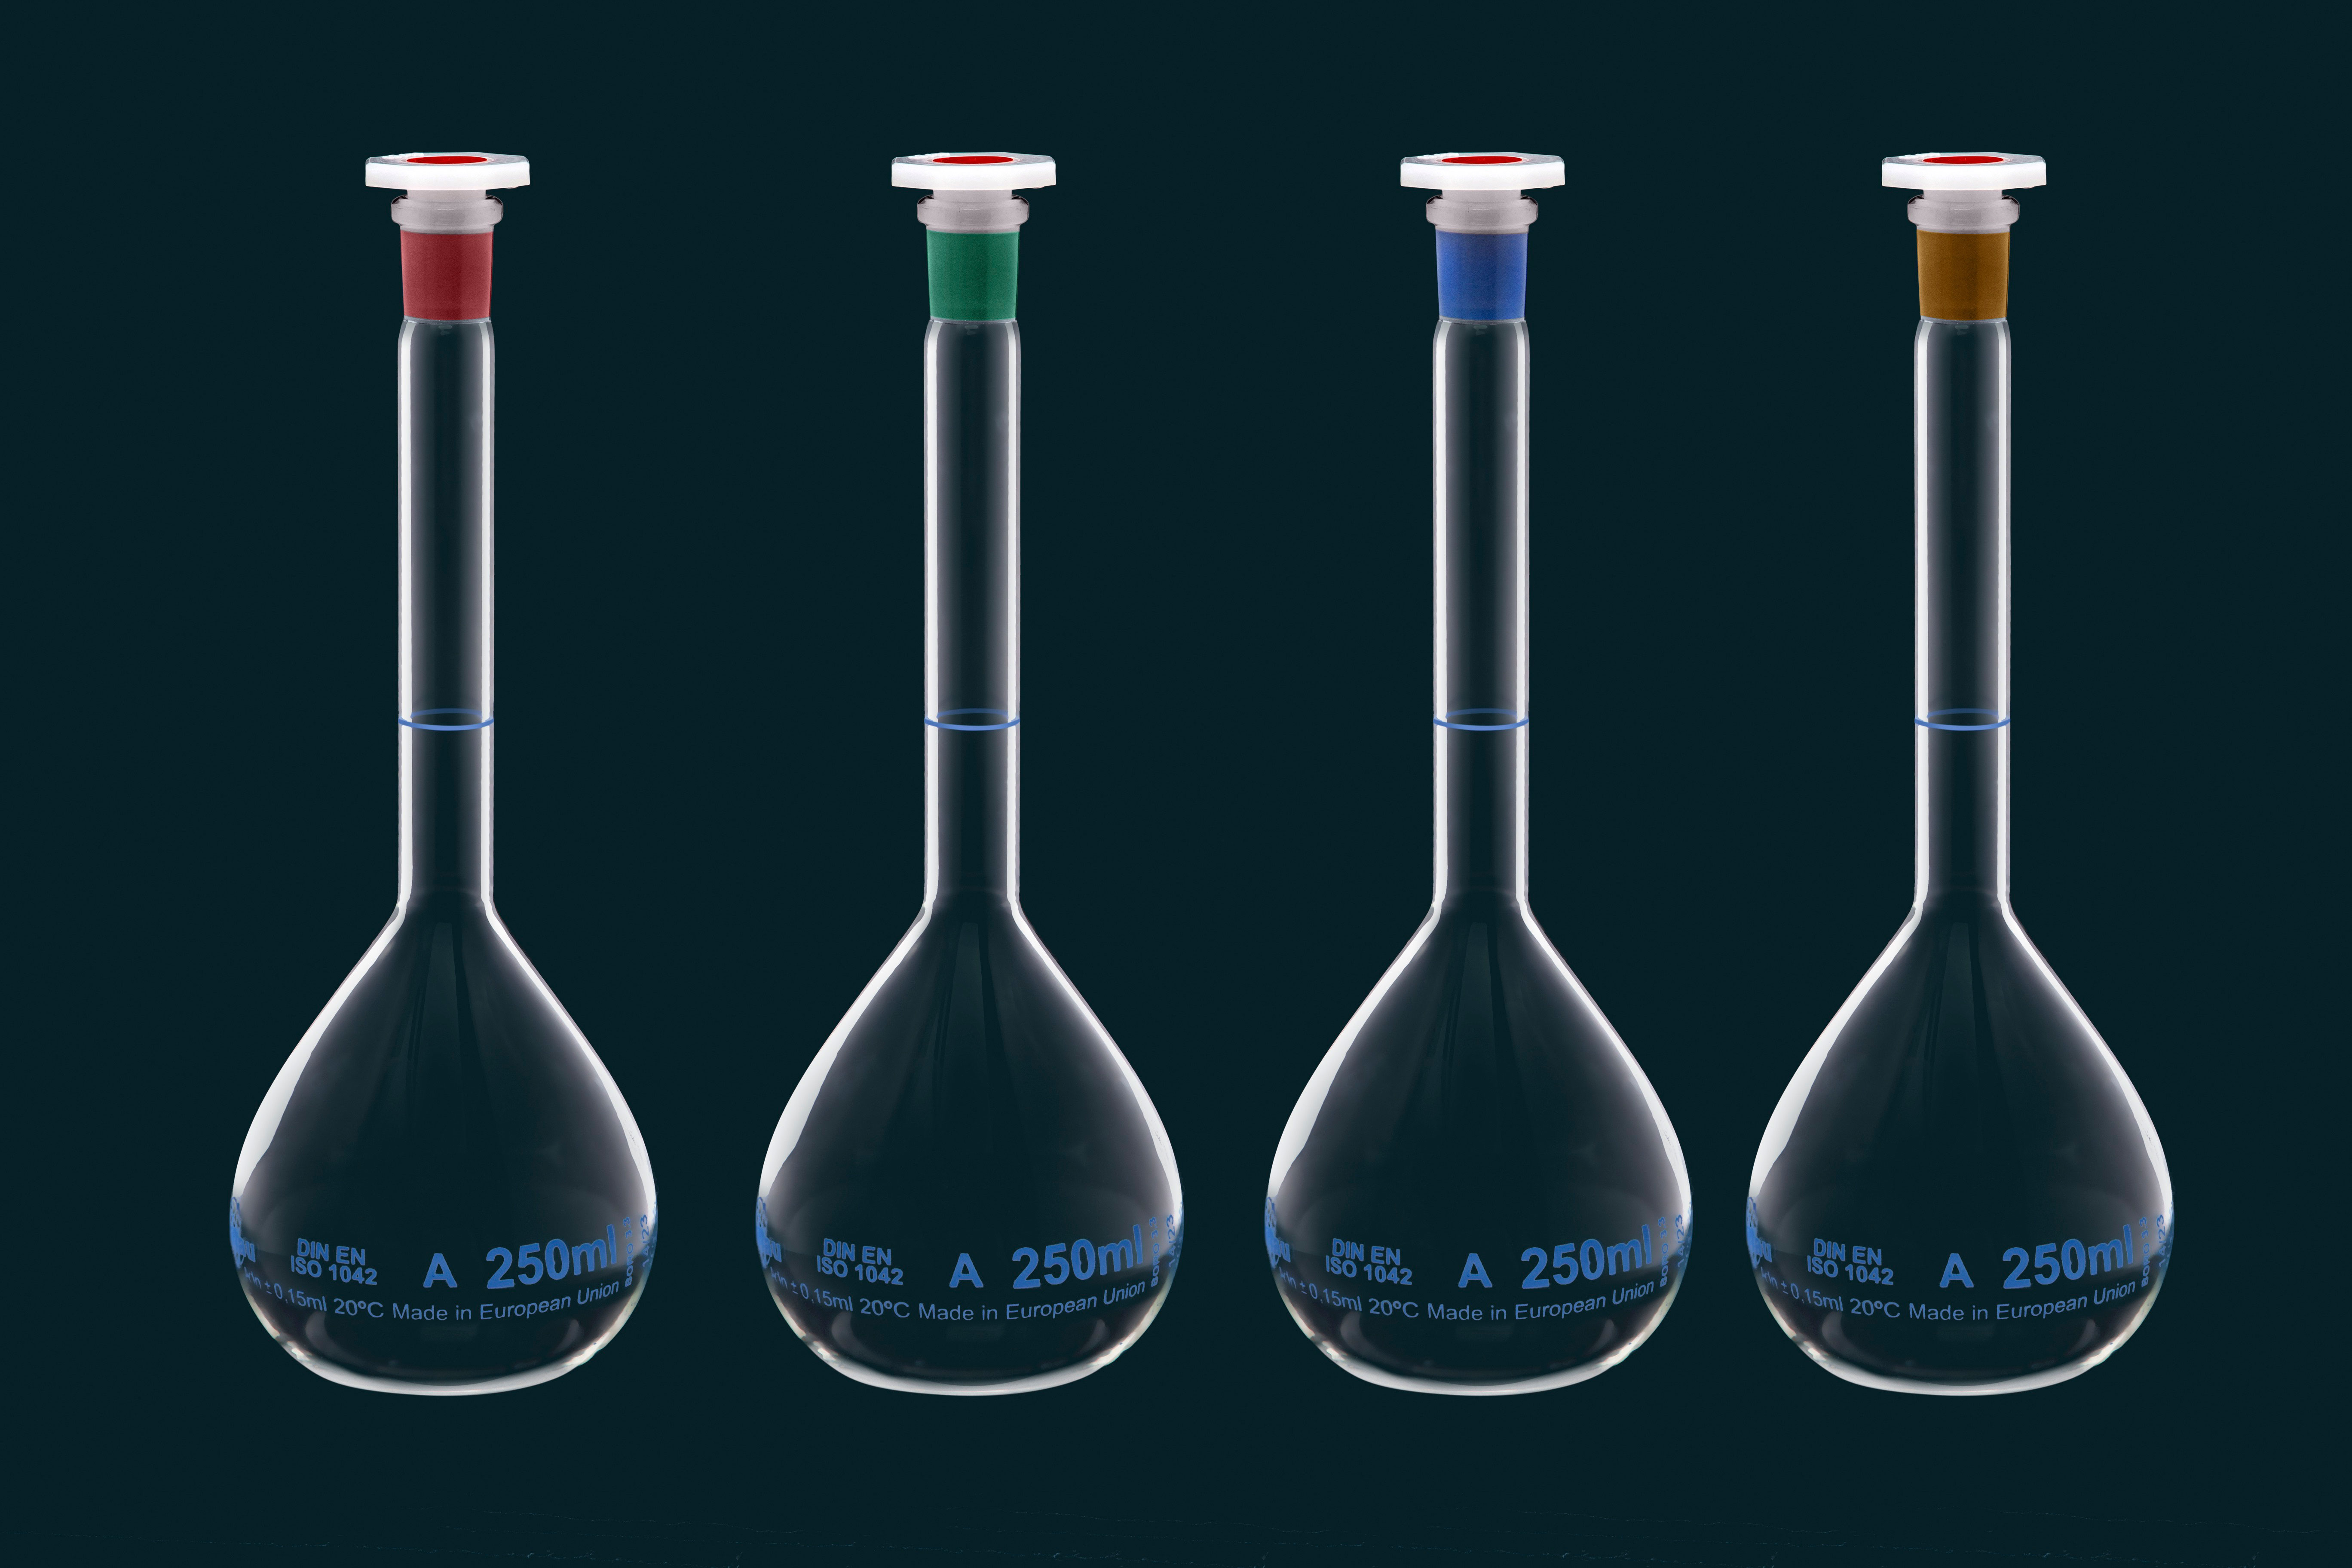 Volumetric flask with yellow neck, class A, 200ml, with PE stopper, lot number and certificate of conformity